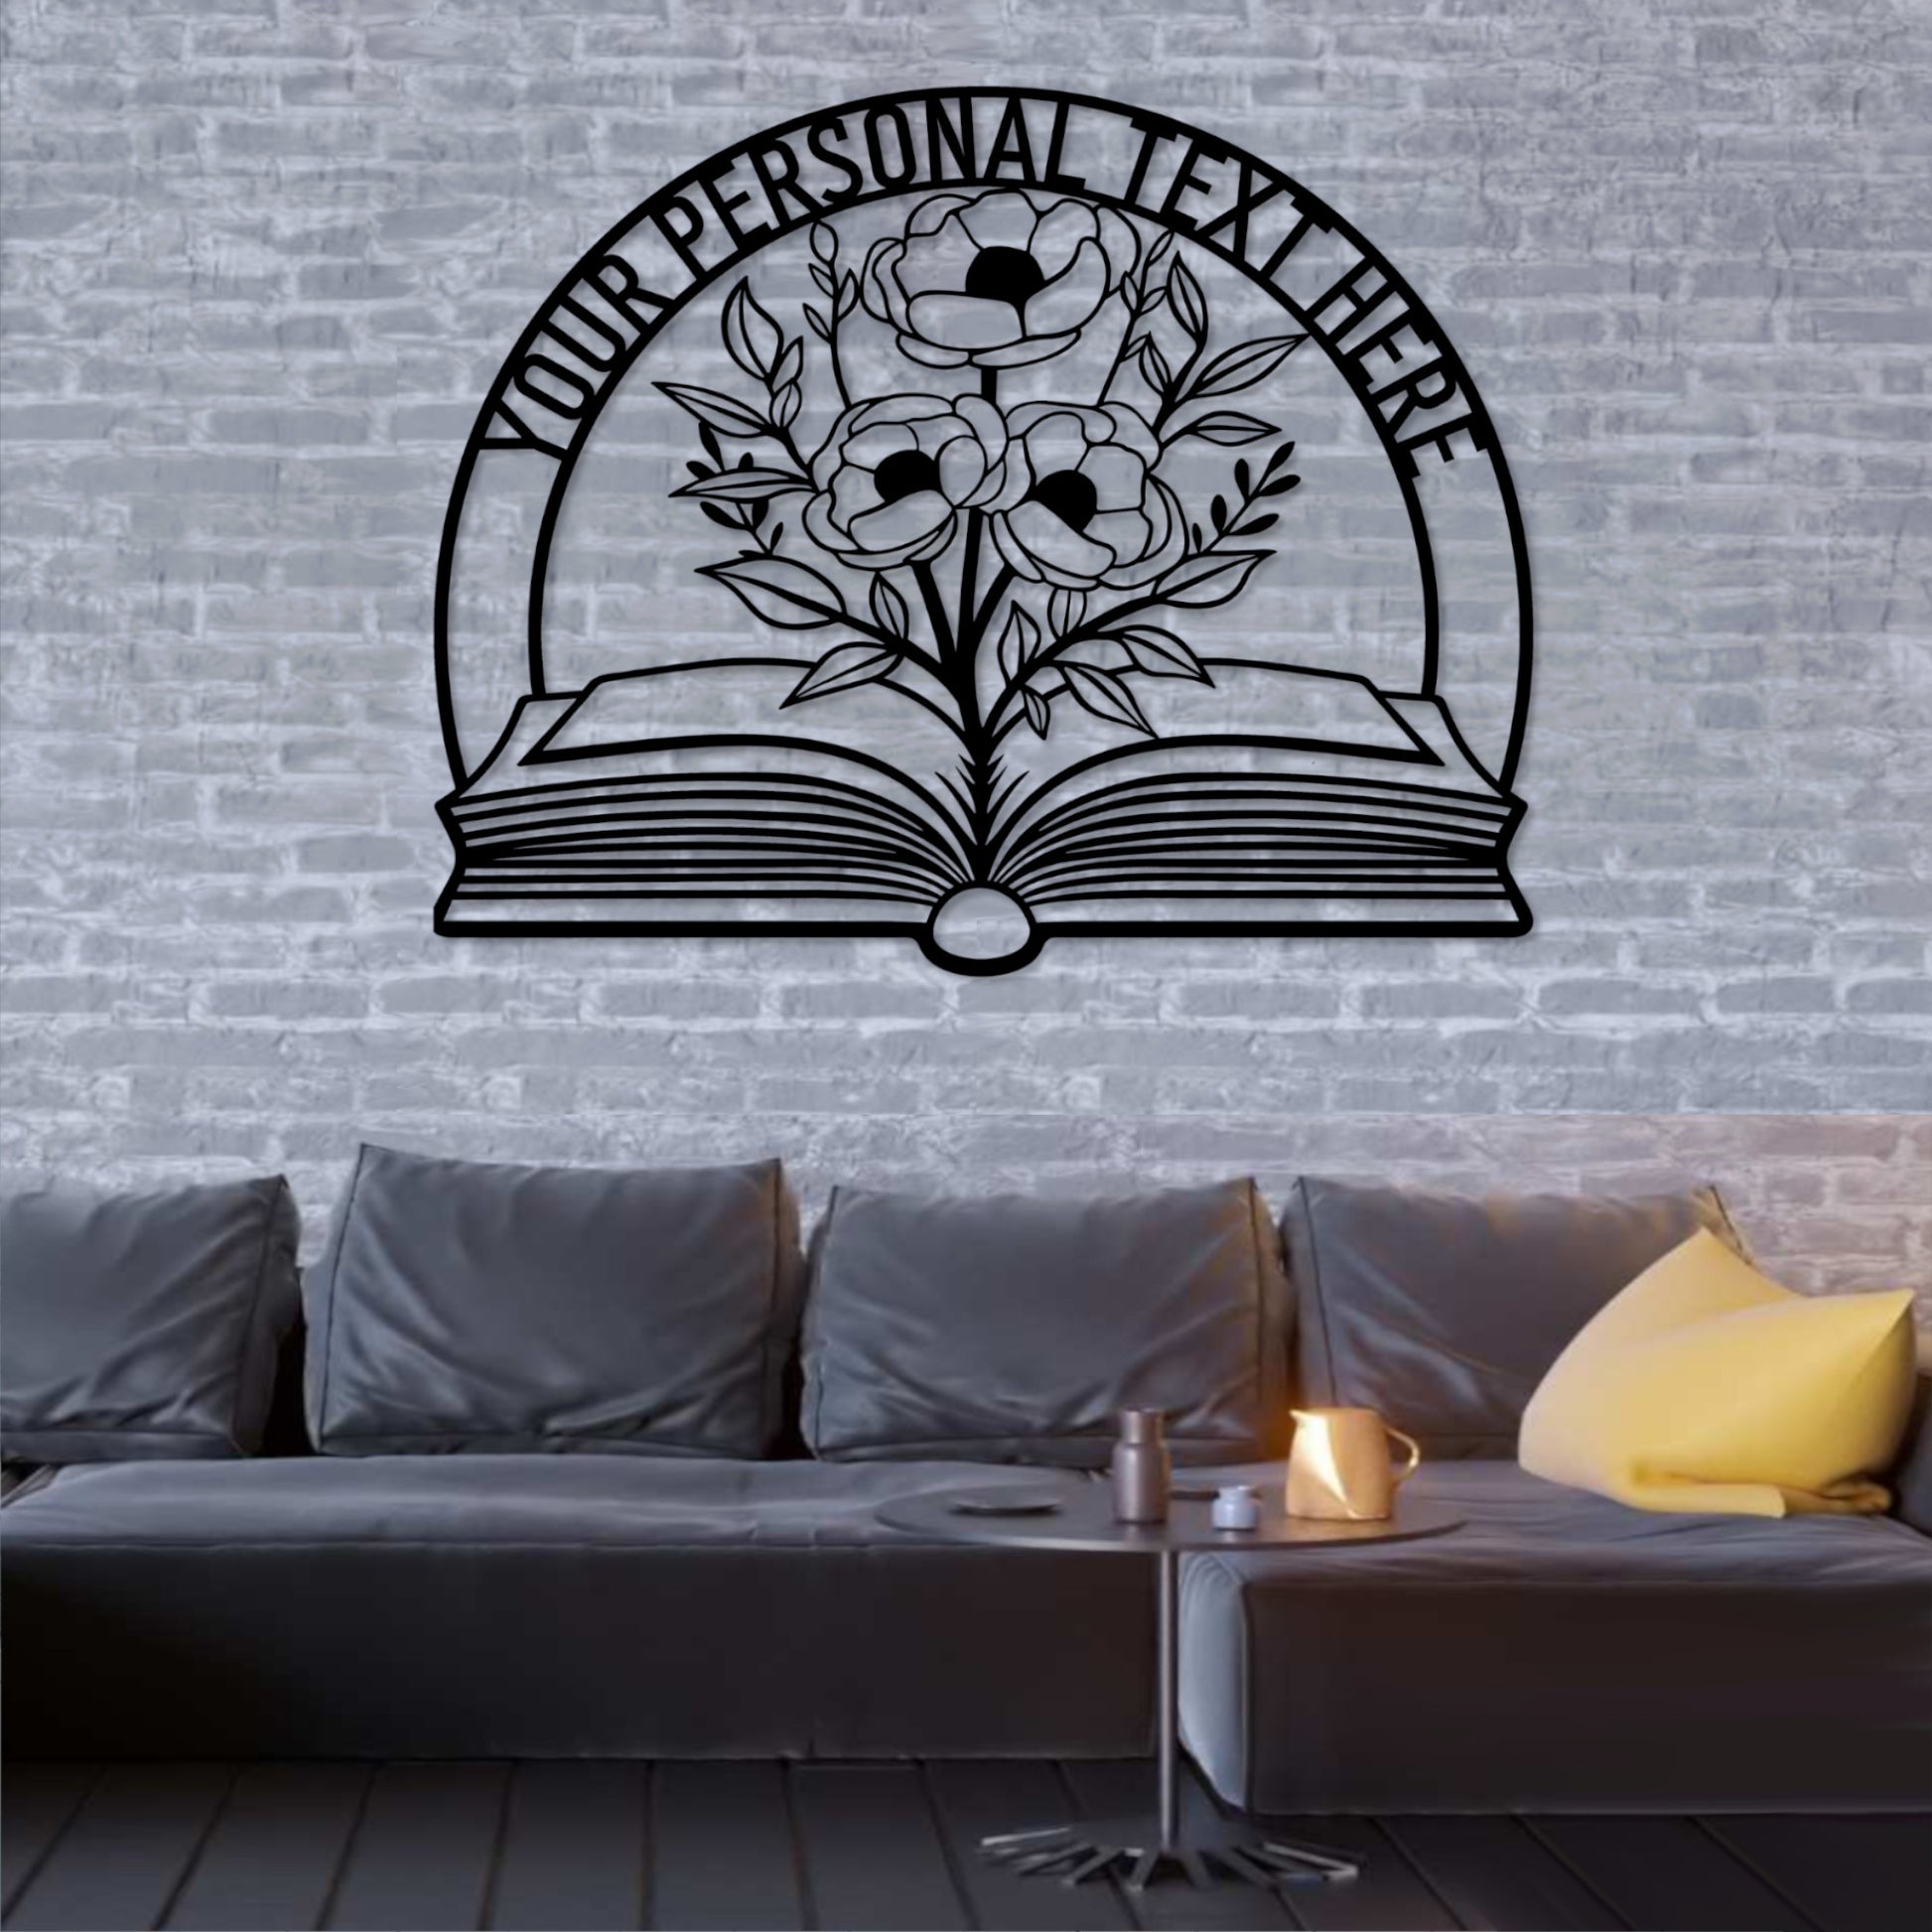 Personalized Reading Room Name Metal Sign. Custom Book Lover Wall Decor Gift. Home Library Wall Hanging. Customized Bookworm Steel Sign Gift